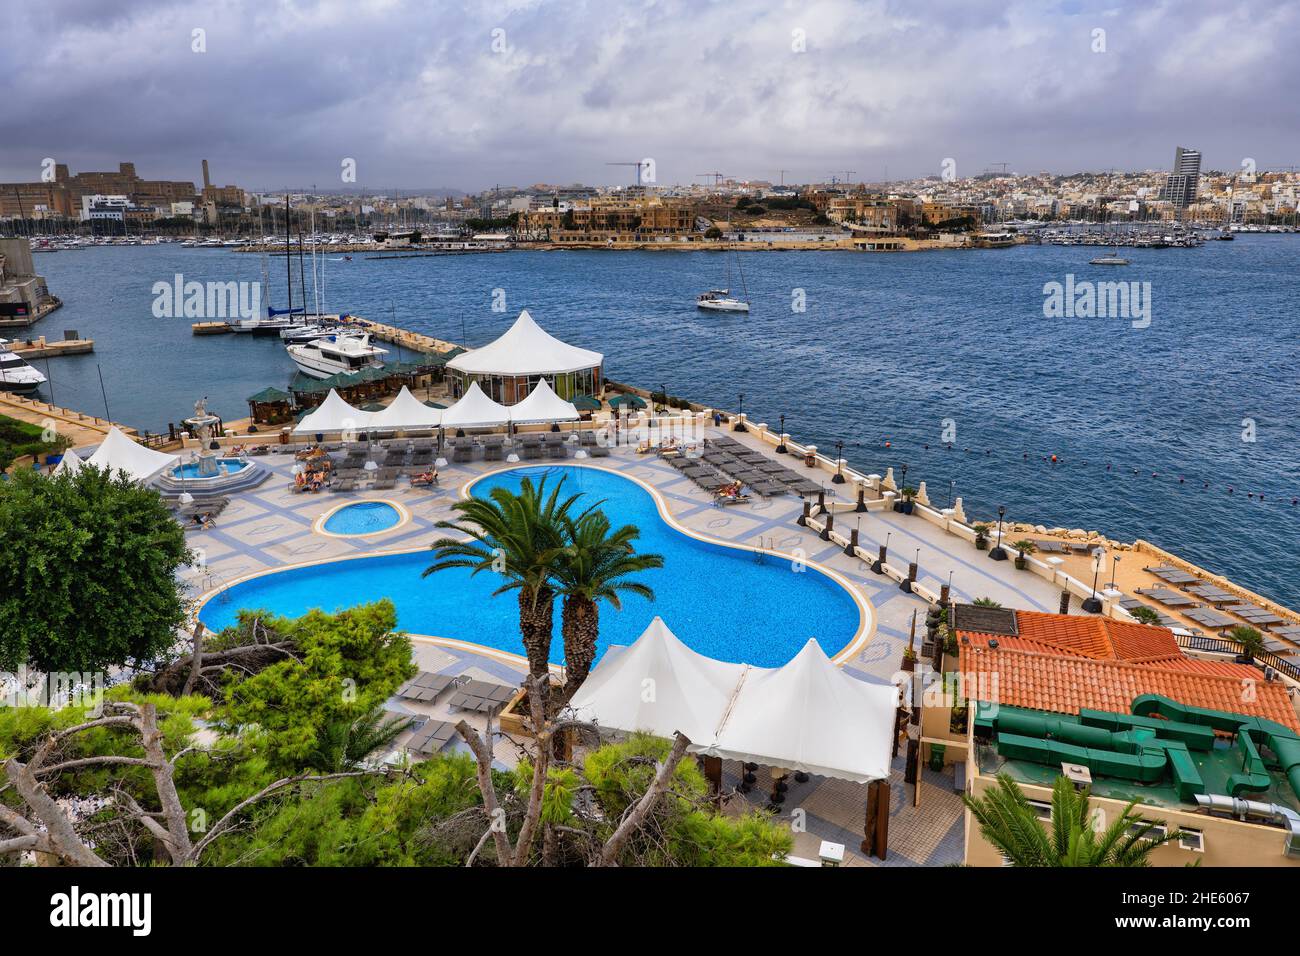 Swimming pool and seaside terrace of Grand Hotel Excelsior in Valletta, Malta, 5-star luxury accommodation at the Marsamxett Harbour. Stock Photo